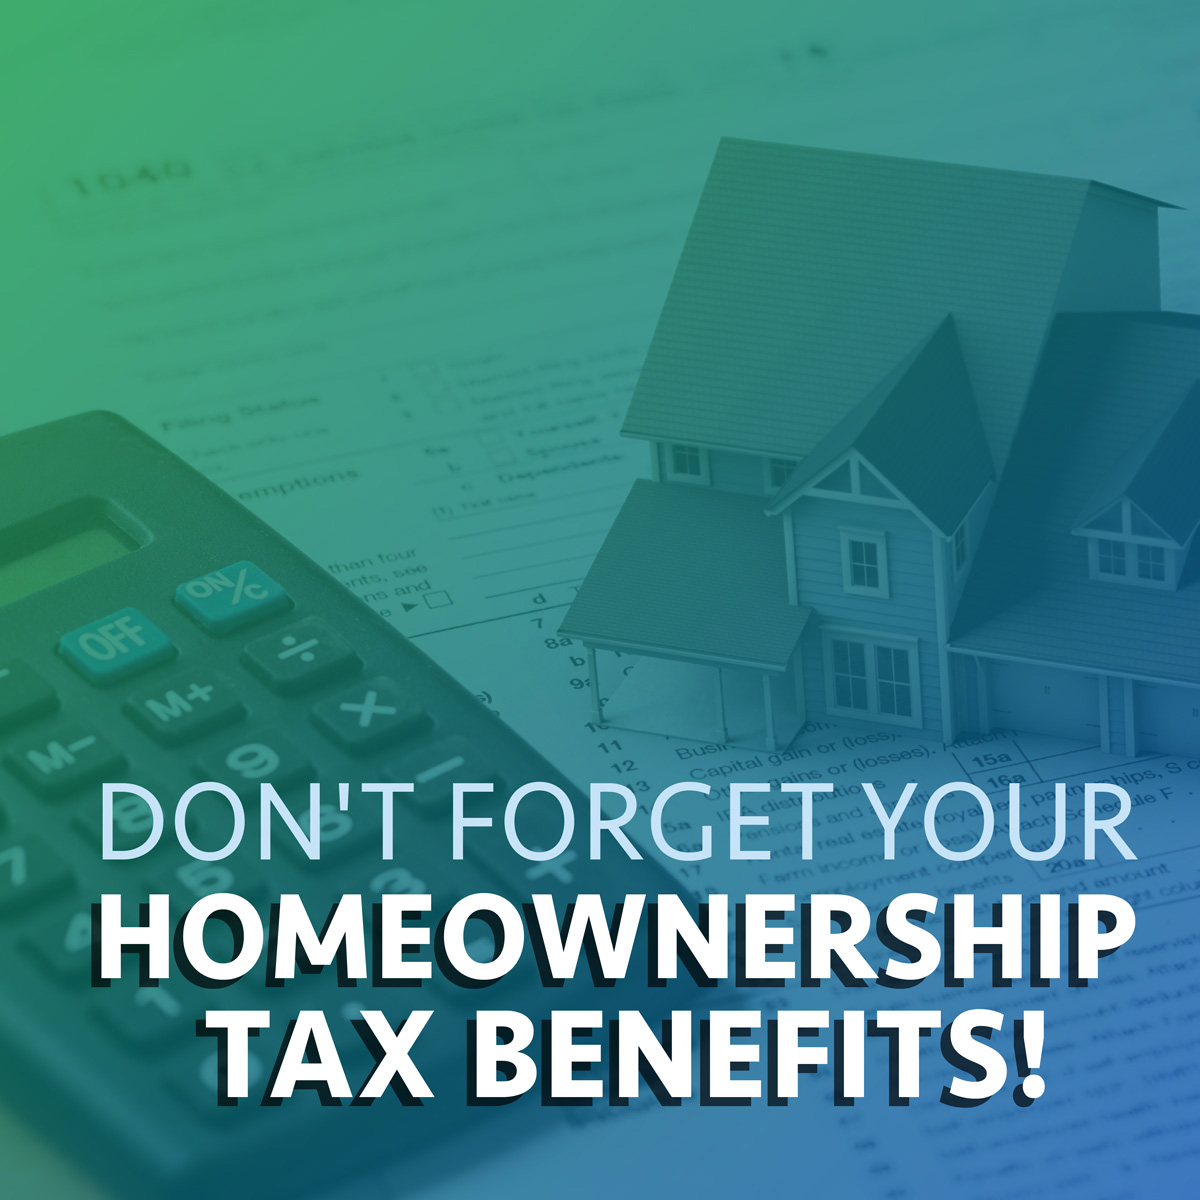 🌟 Ready to unlock the tax benefits of homeownership? 🏡💰 Let's chat about how owning your own place can save you money and make financial sense for your future. 📞 #Homeownership #TaxAdvantages #SmartMoneyDecision #CallUsToday #katlendstx